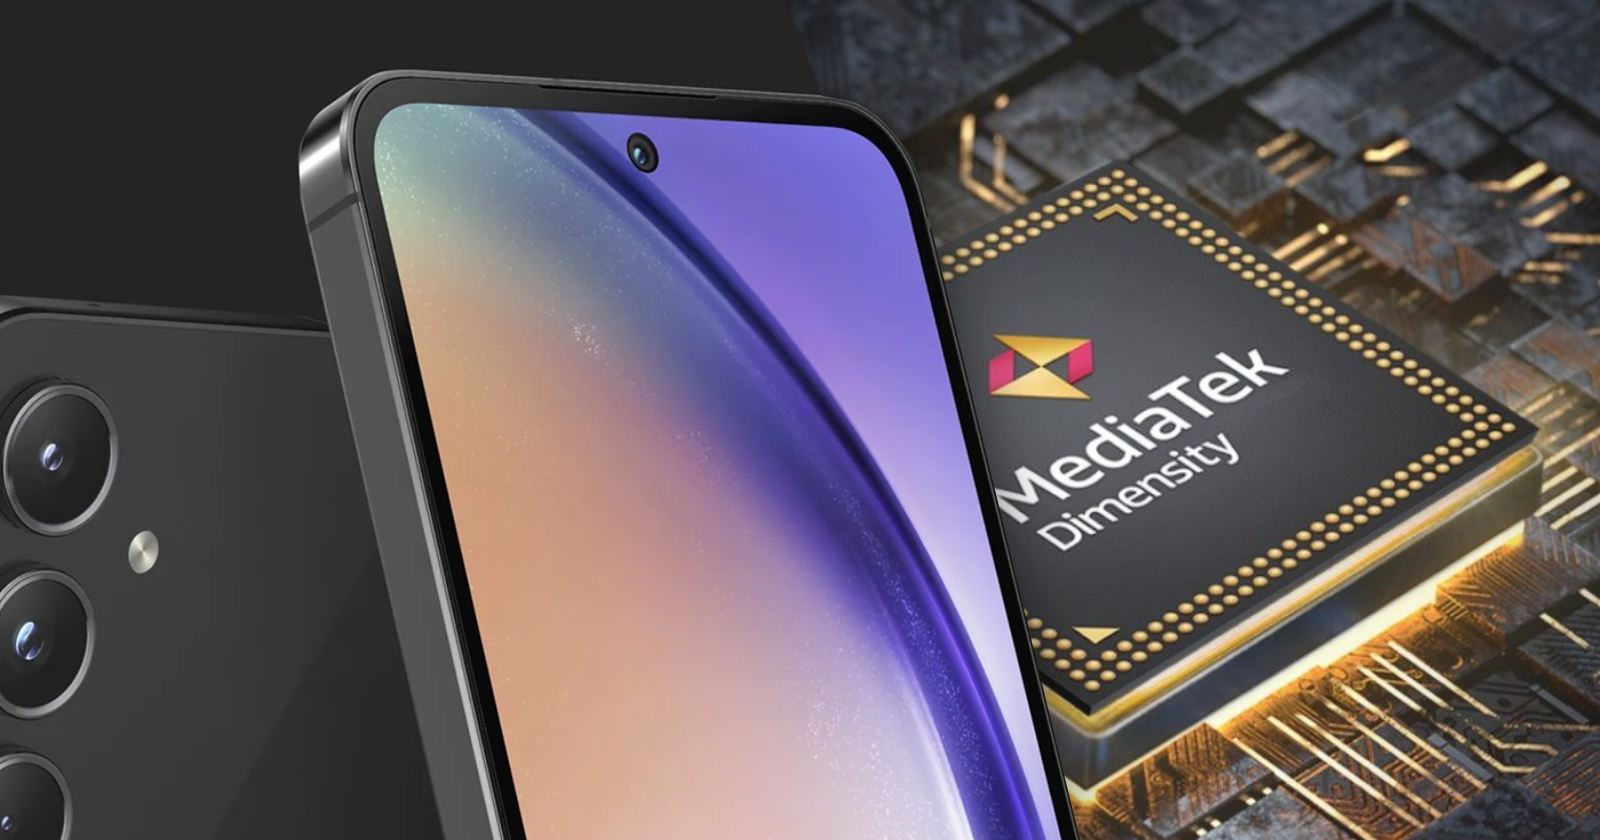 Samsung’s move towards an agreement with MediaTek after the Qualcomm-Samsung deal!